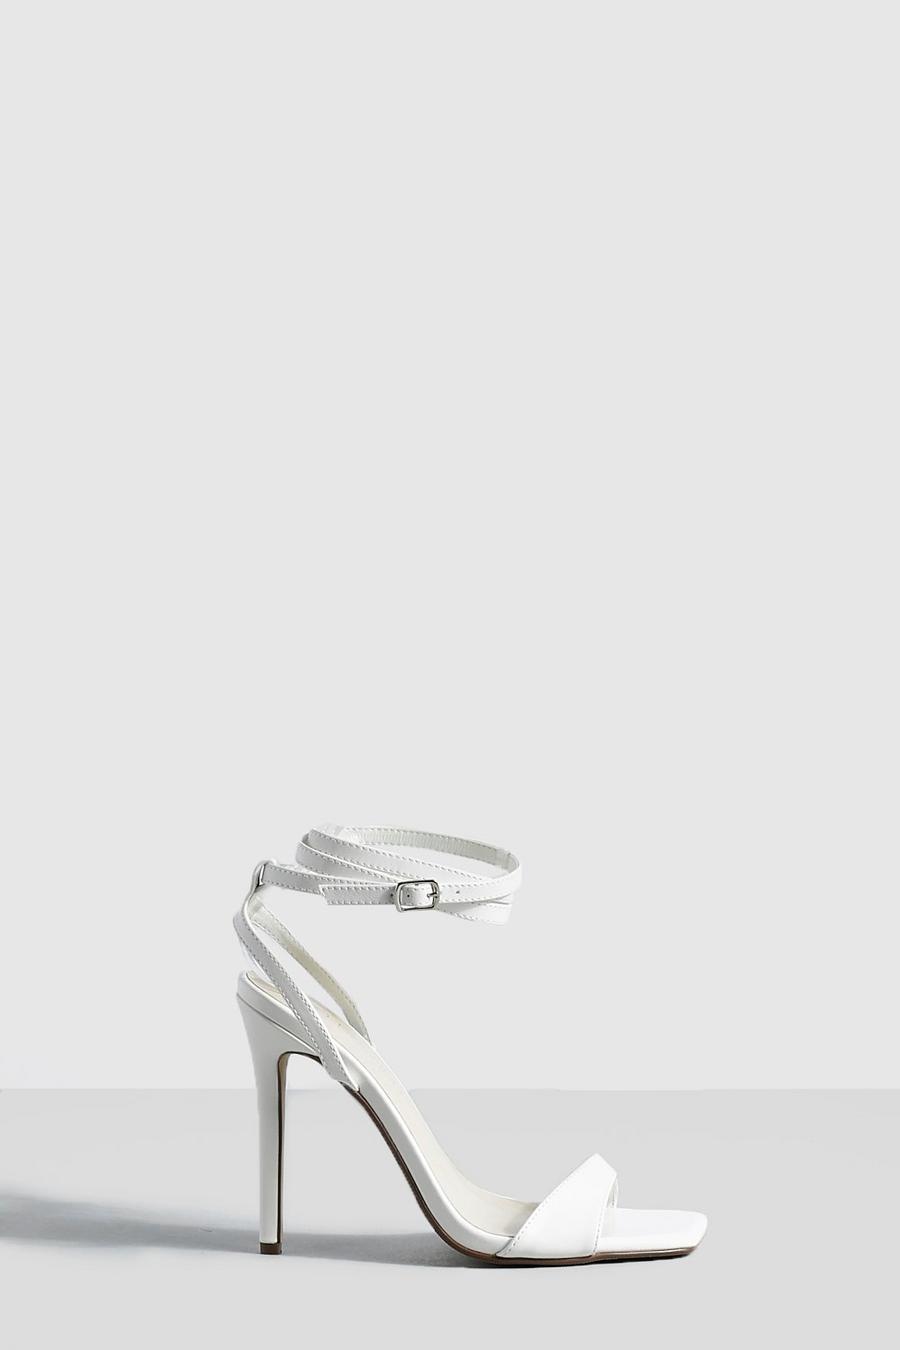 White Wide Width Strappy Ankle Barely There Stiletto Heel